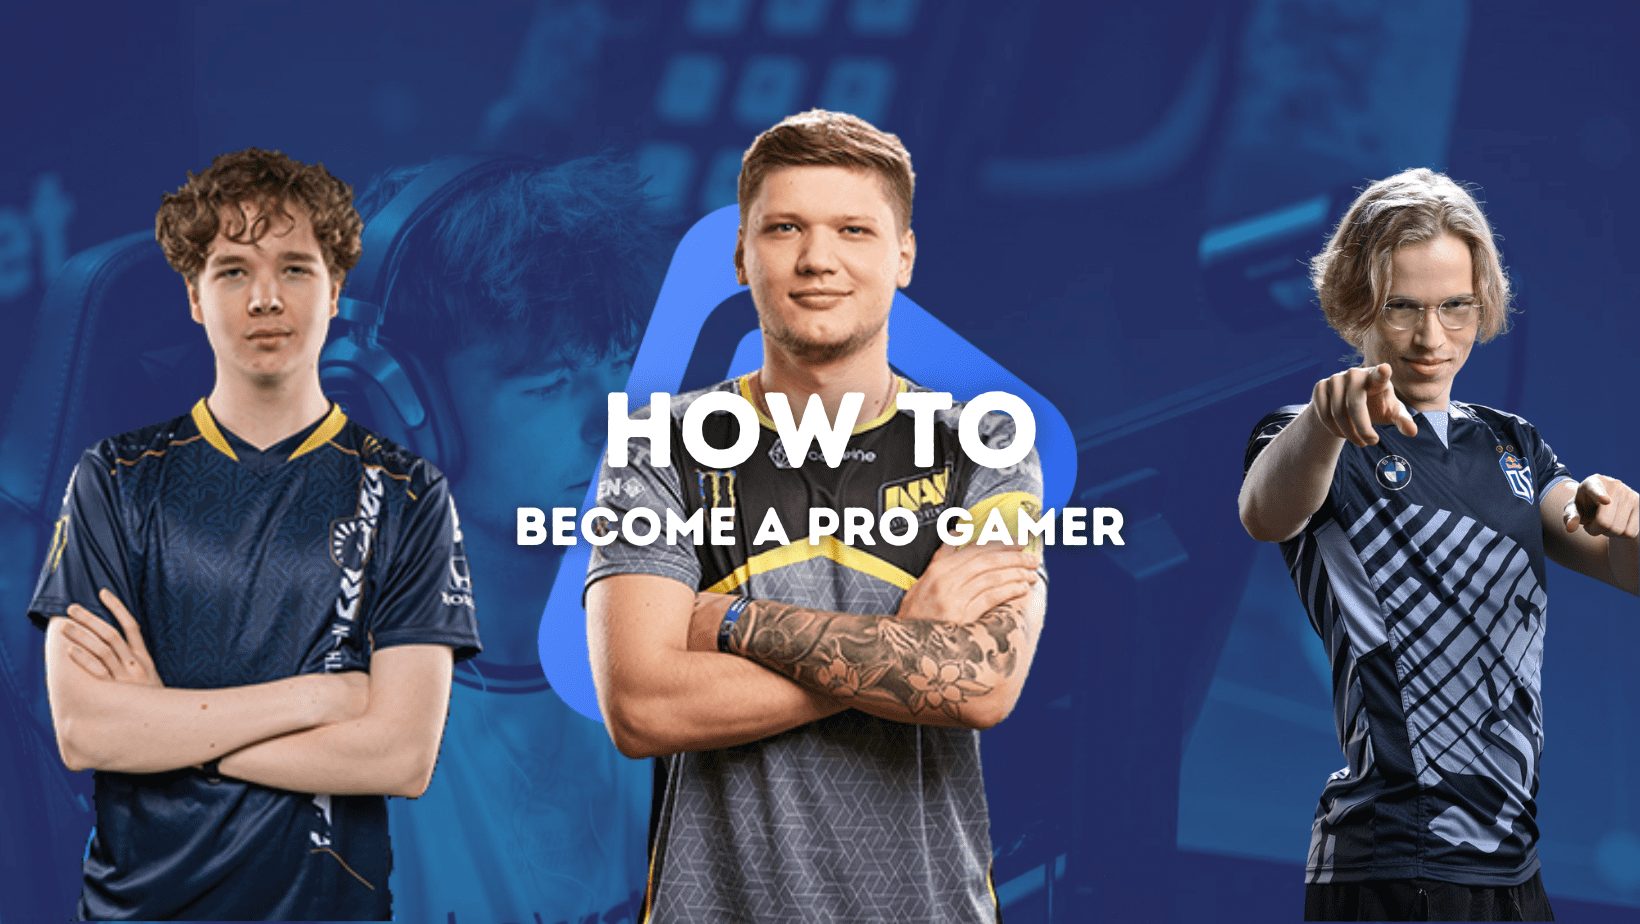 How to Become a Pro Gamer - Intel